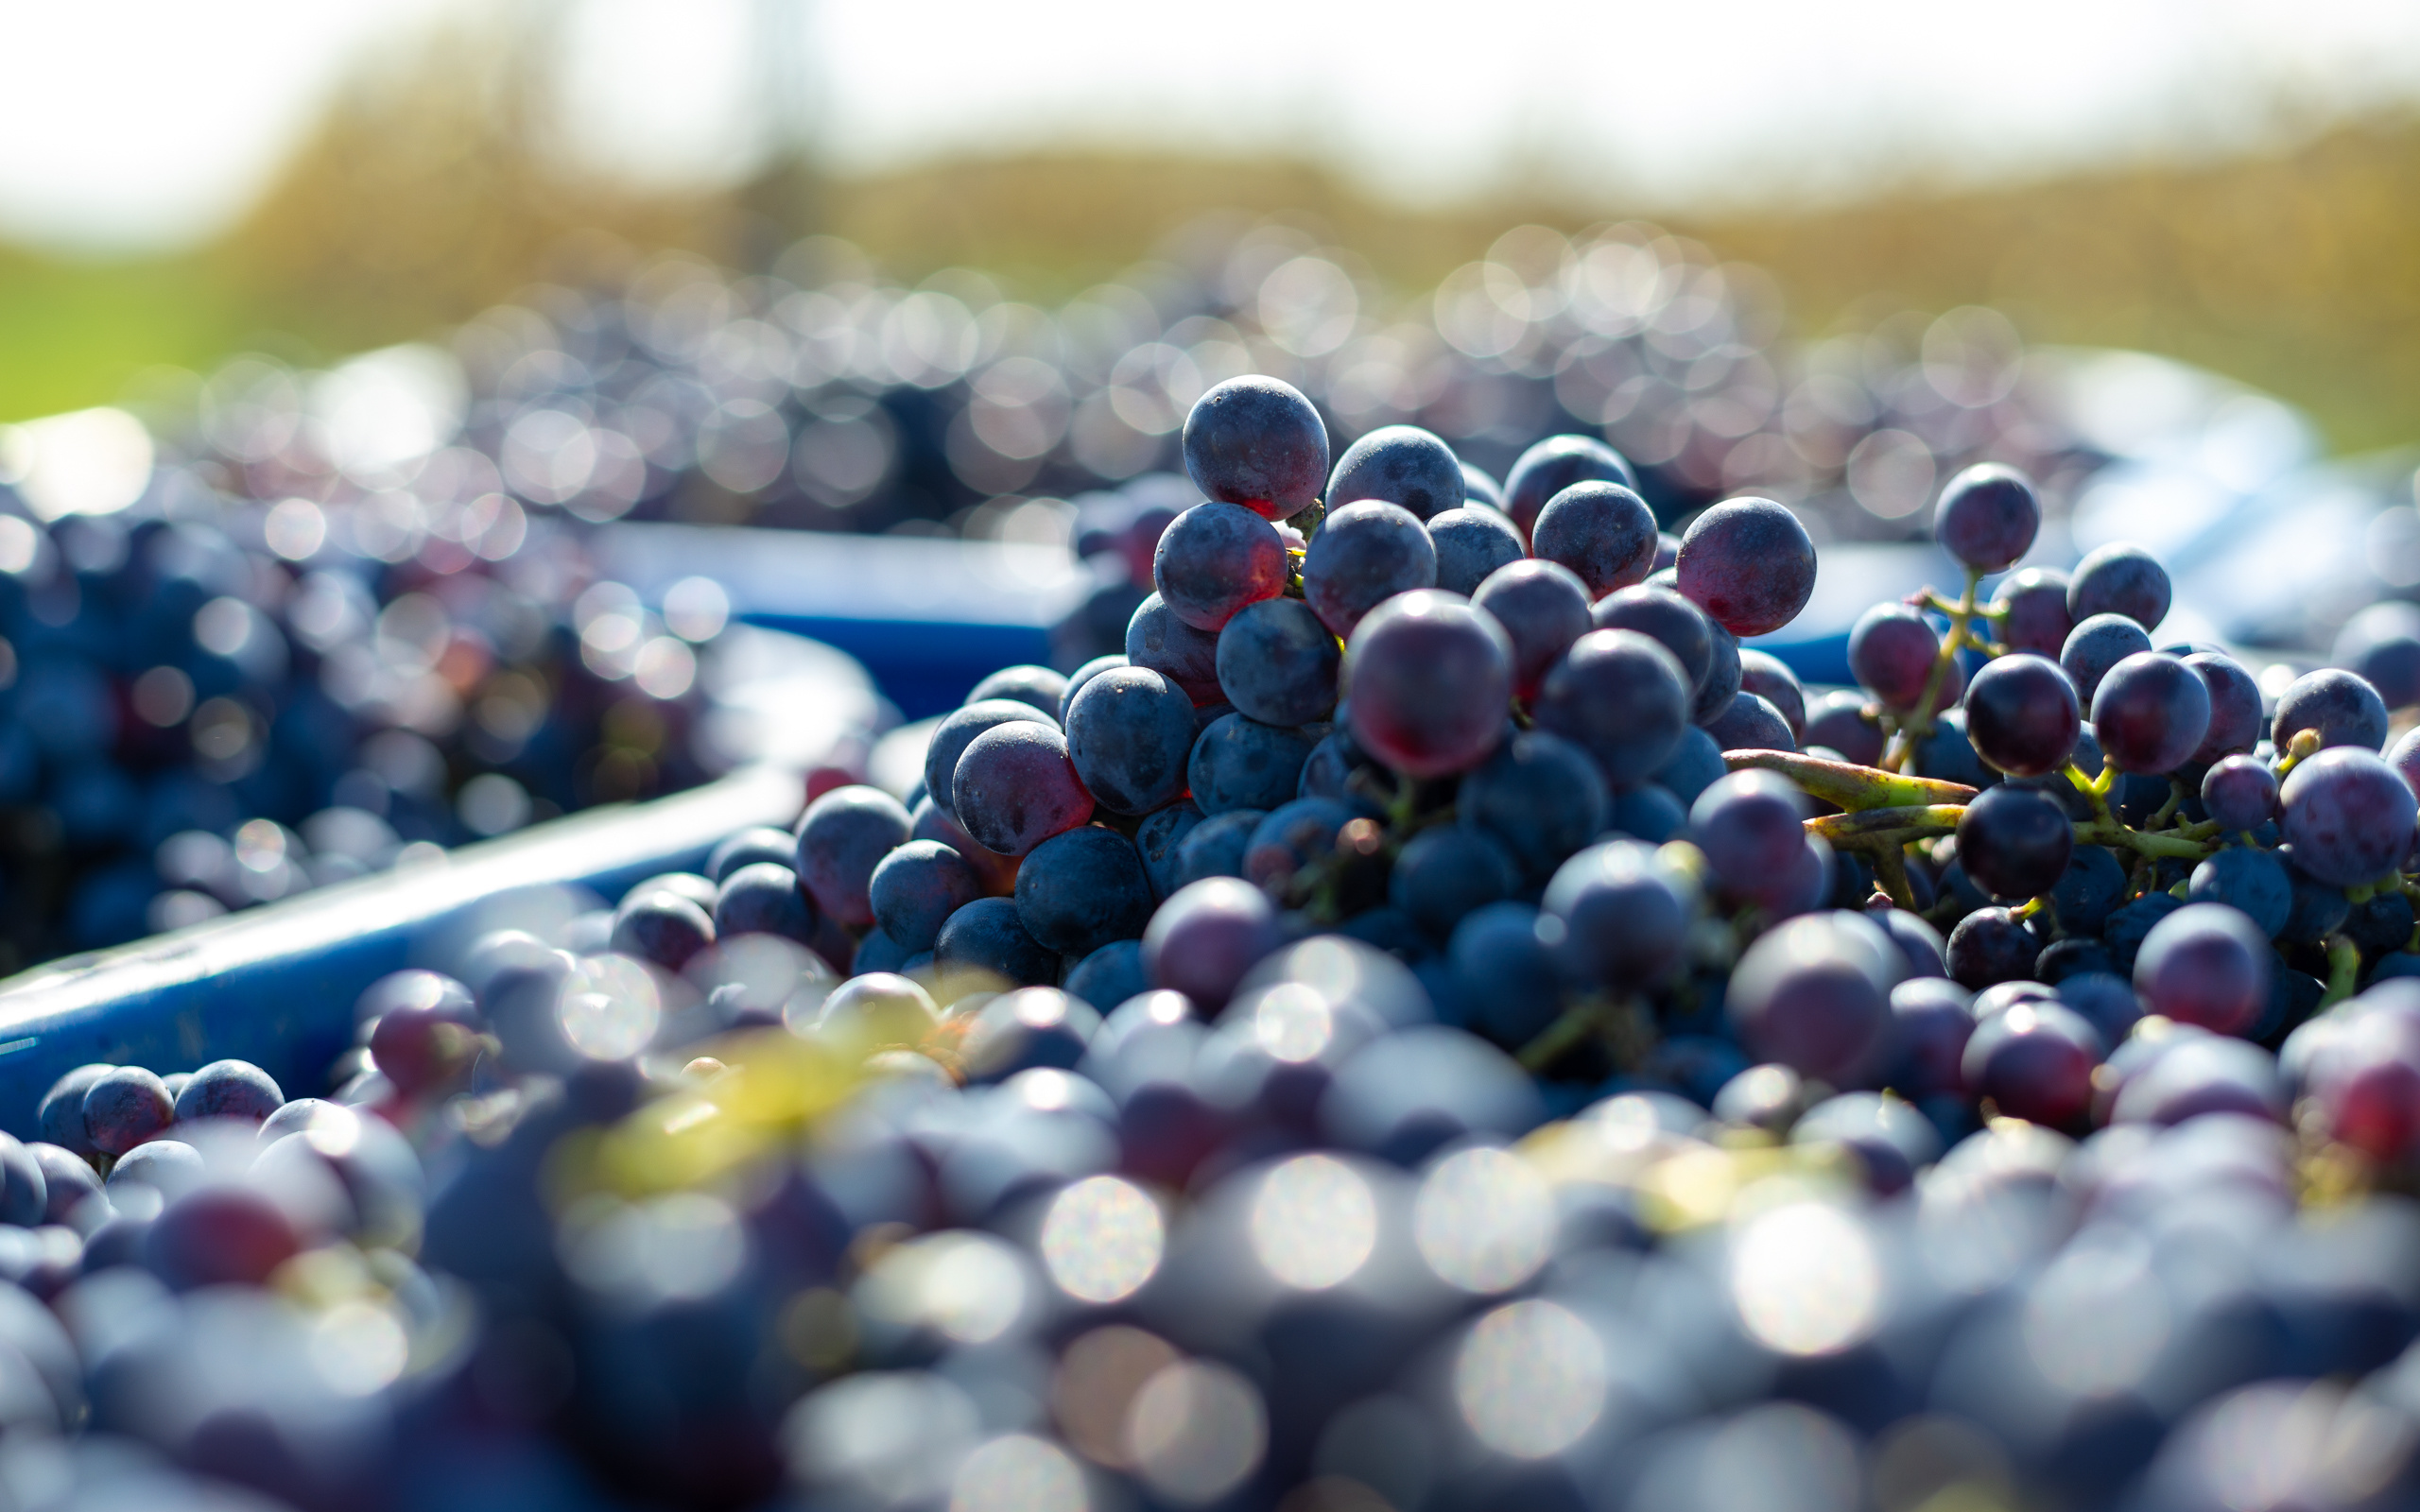 Closeup of harvested red wine grapes in bins